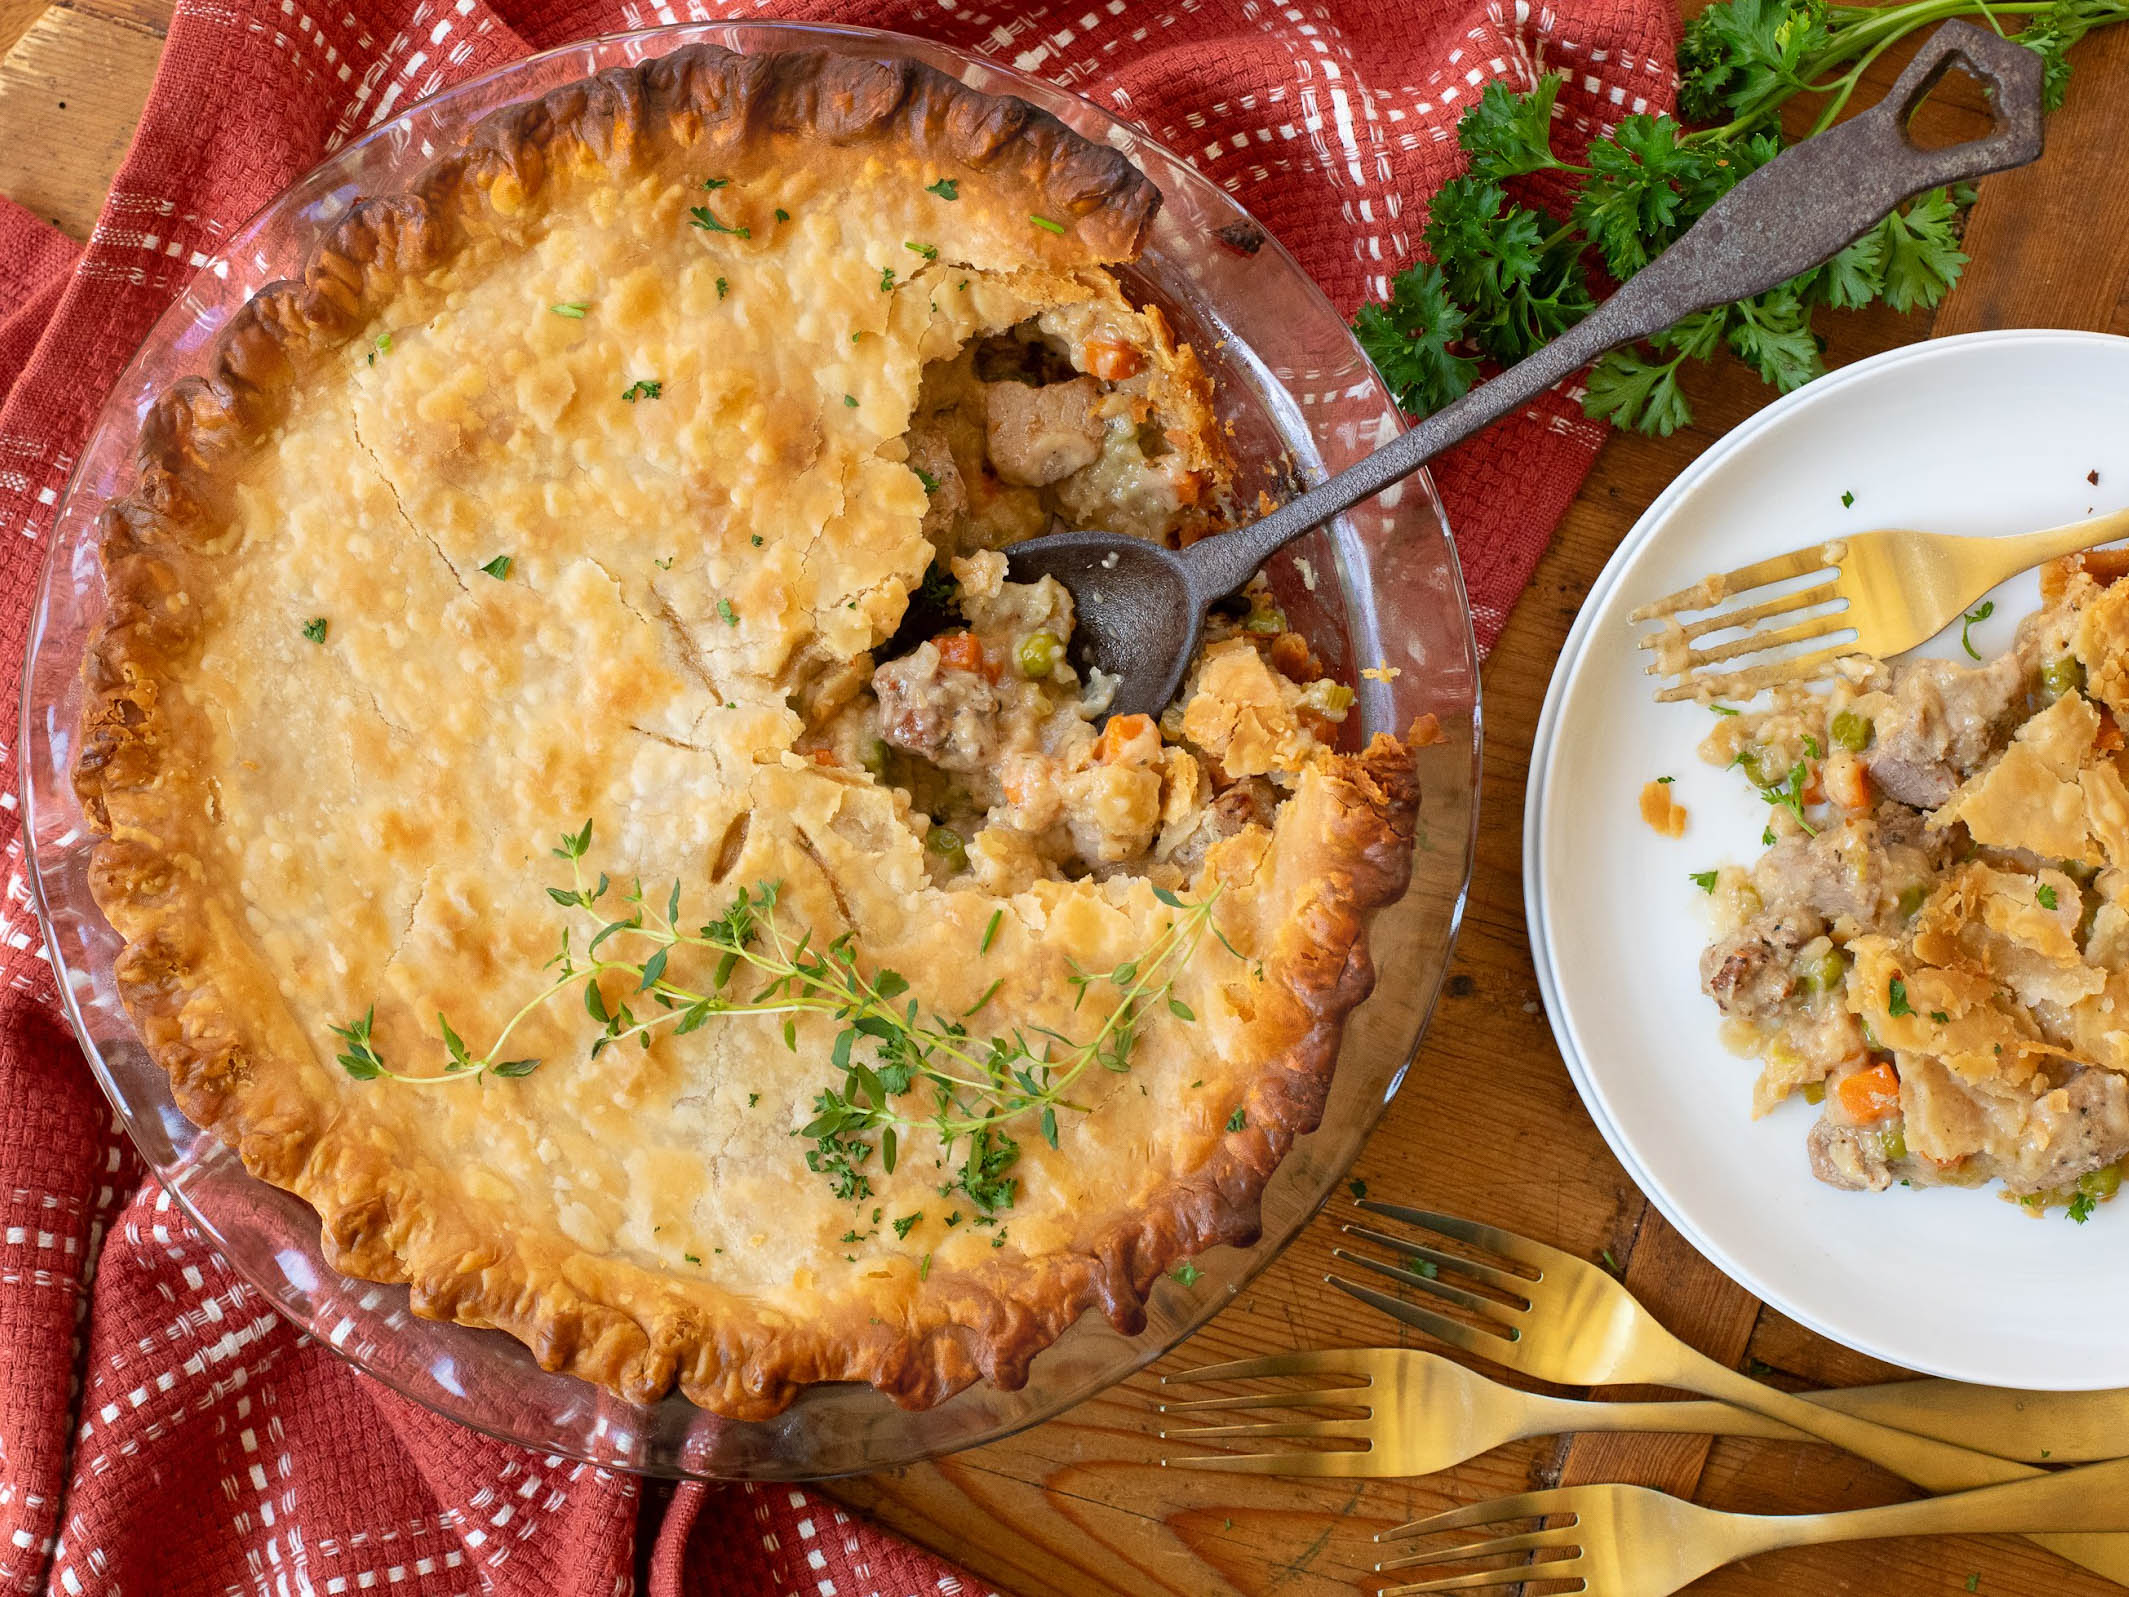 Serve Up Great Taste With Ease At Your Next Gathering – Grab Hatfield Marinated Pork For My Pork Pot Pie